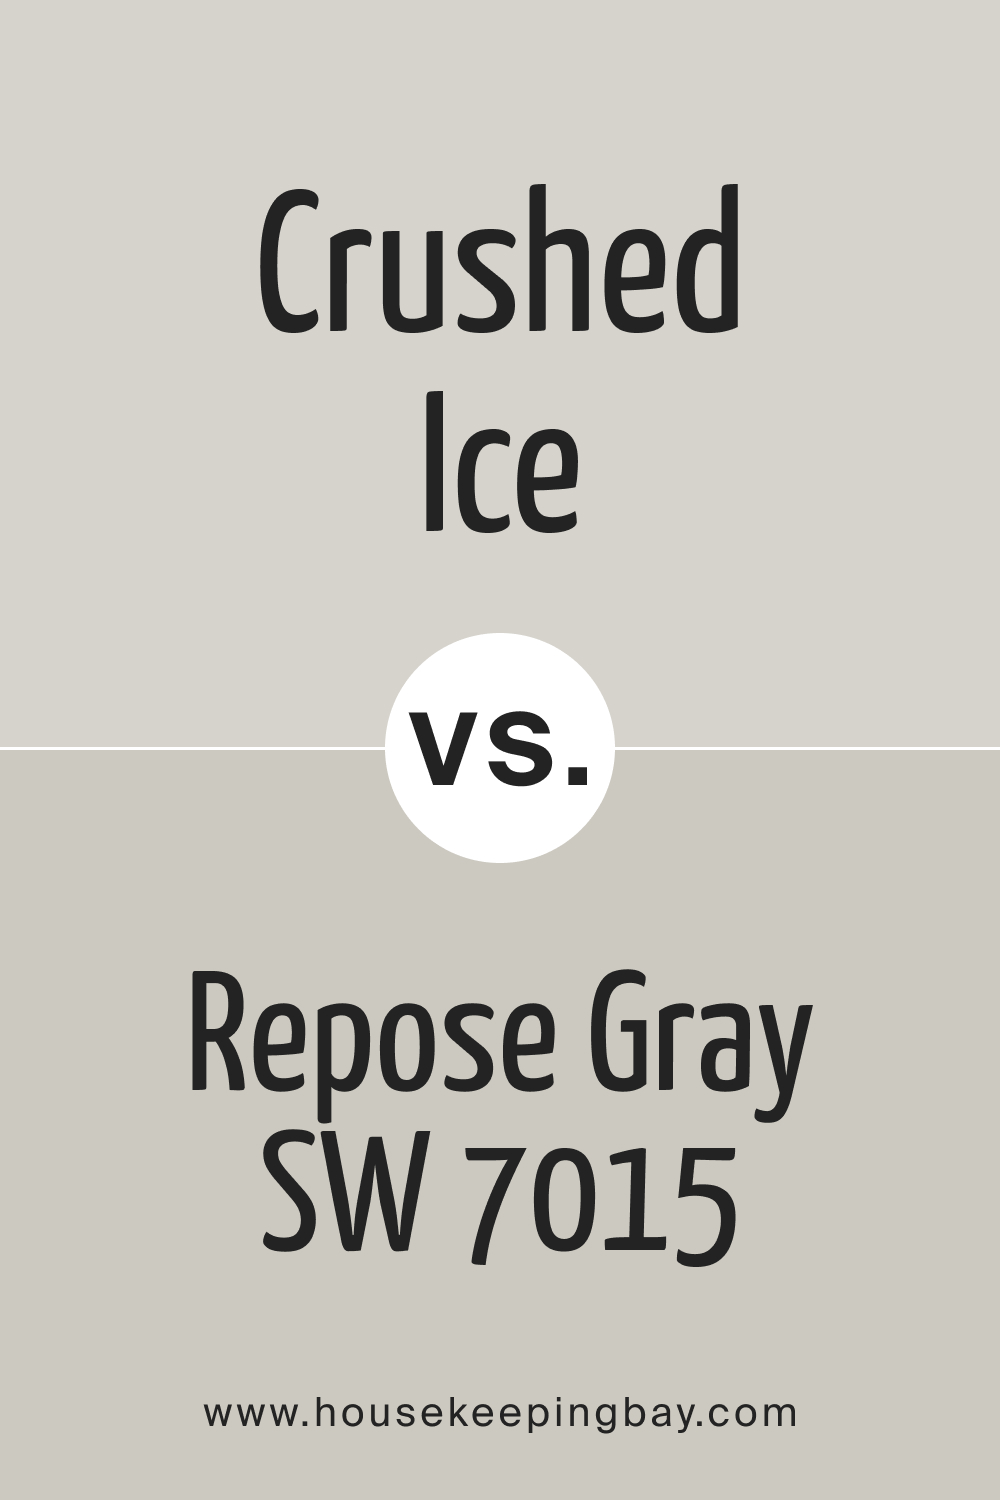 Crushed Ice SW 7647 vs Repose Gray SW 7015